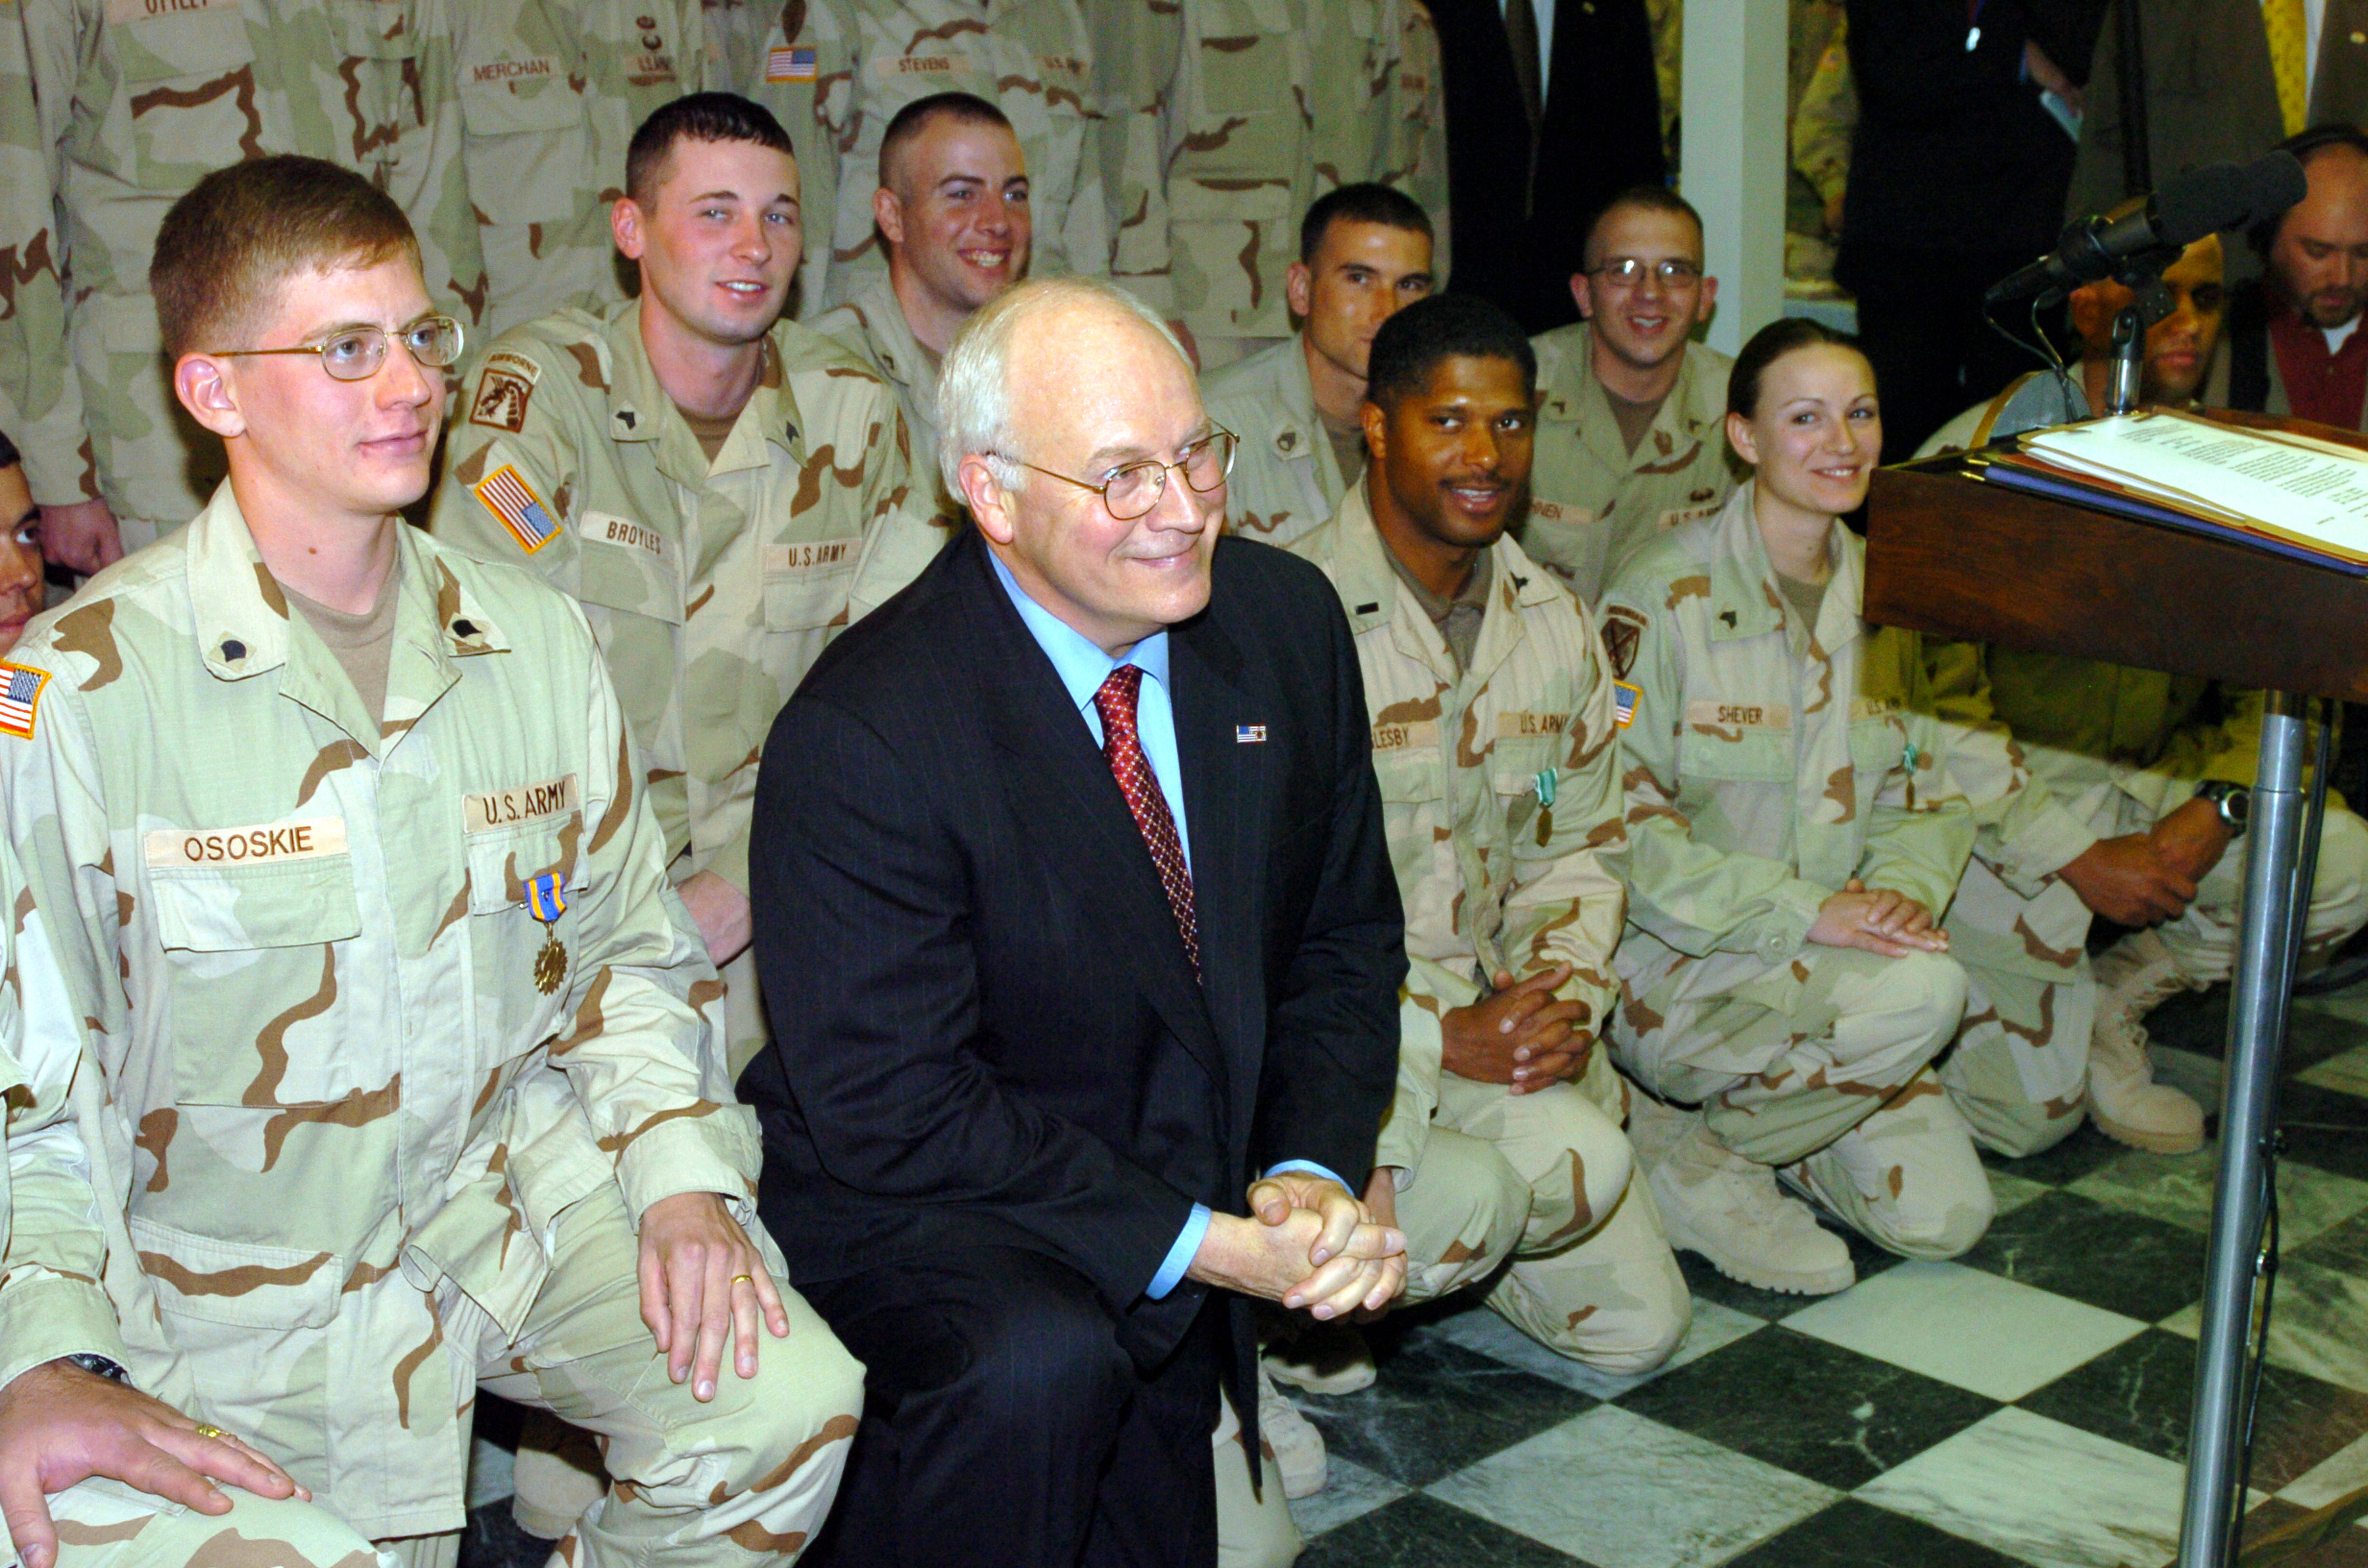 US Navy 041207-N-5608F-020 U.S. Vice President Dick Cheney takes a moment to pose with several service members in the dinning facility in Bagram, Afghanistan